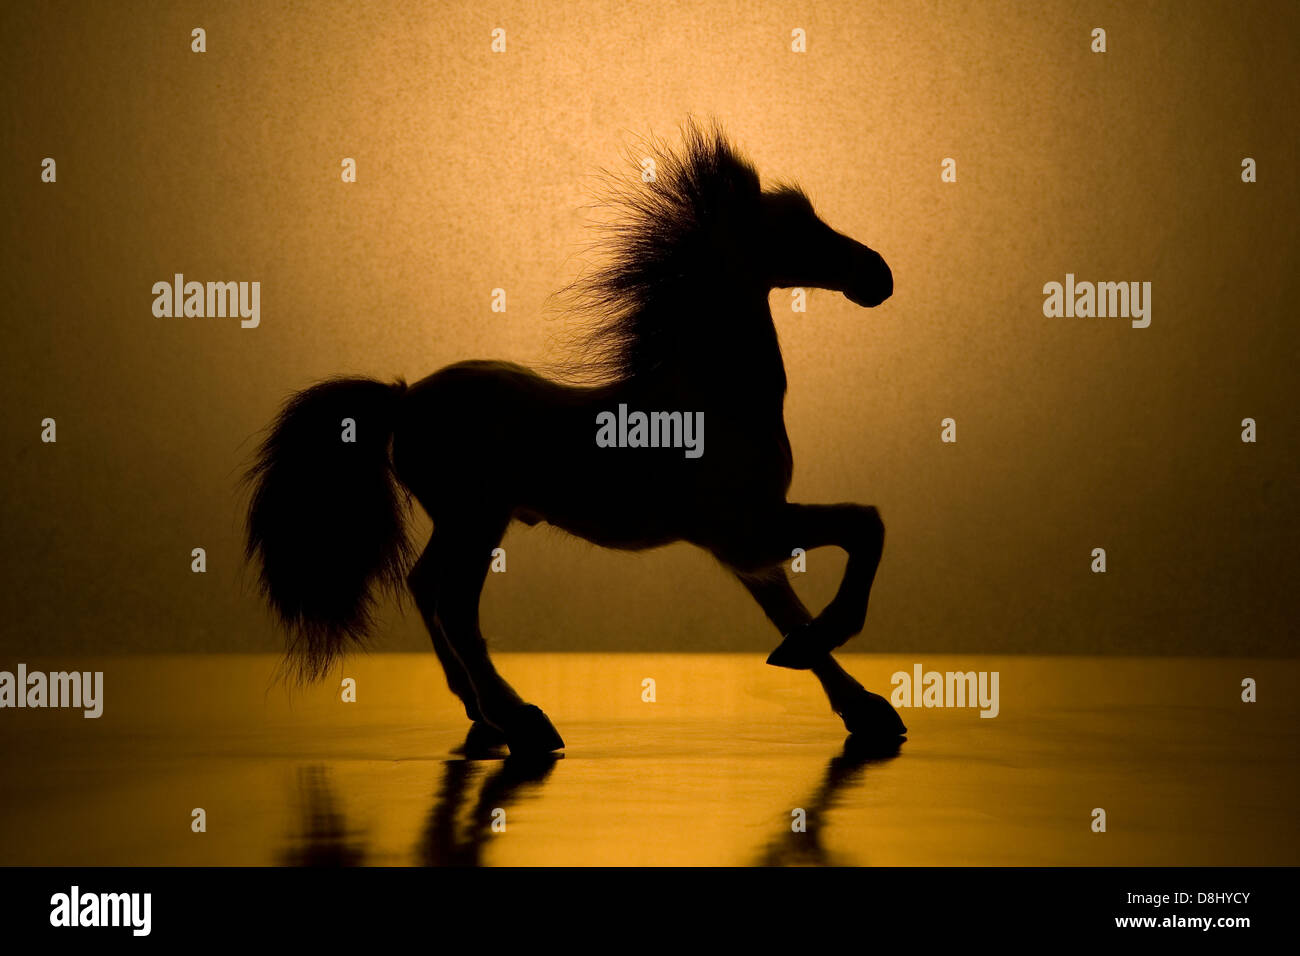 Silhouette of Toy Horse Stock Photo